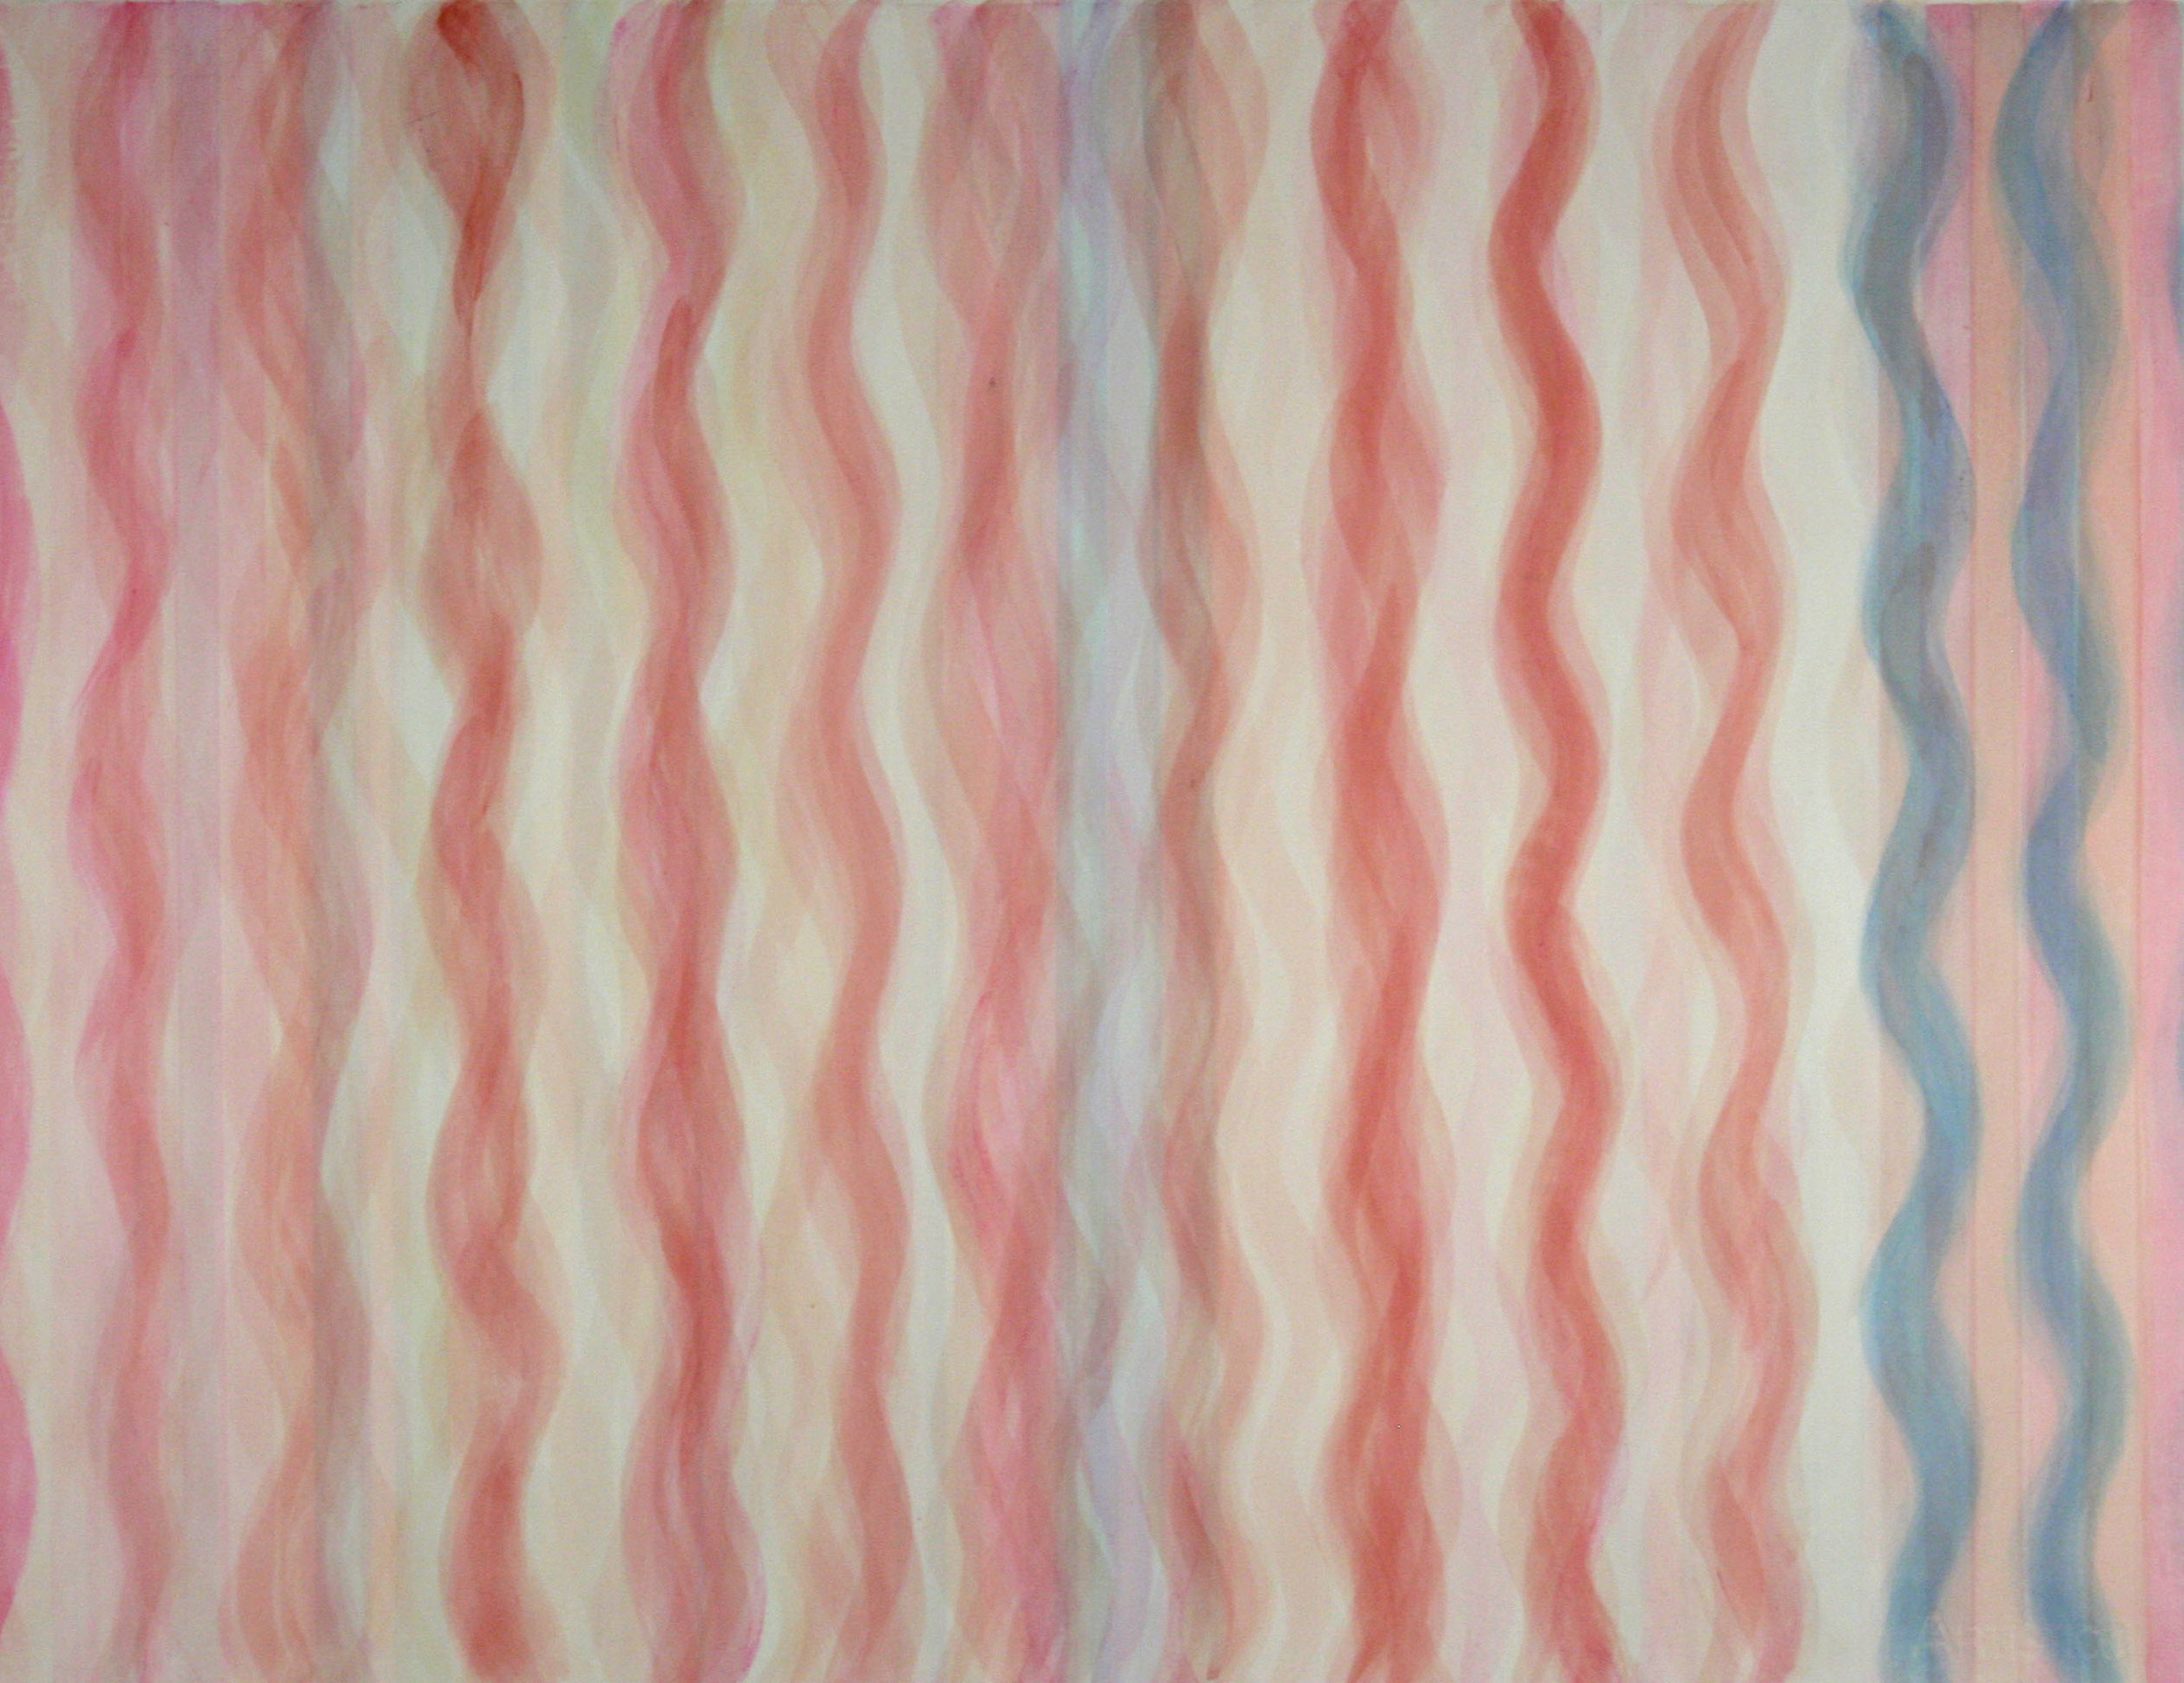    Grooves , 2006   Acrylic ink and watercolor on paper  22 x 30 inches 